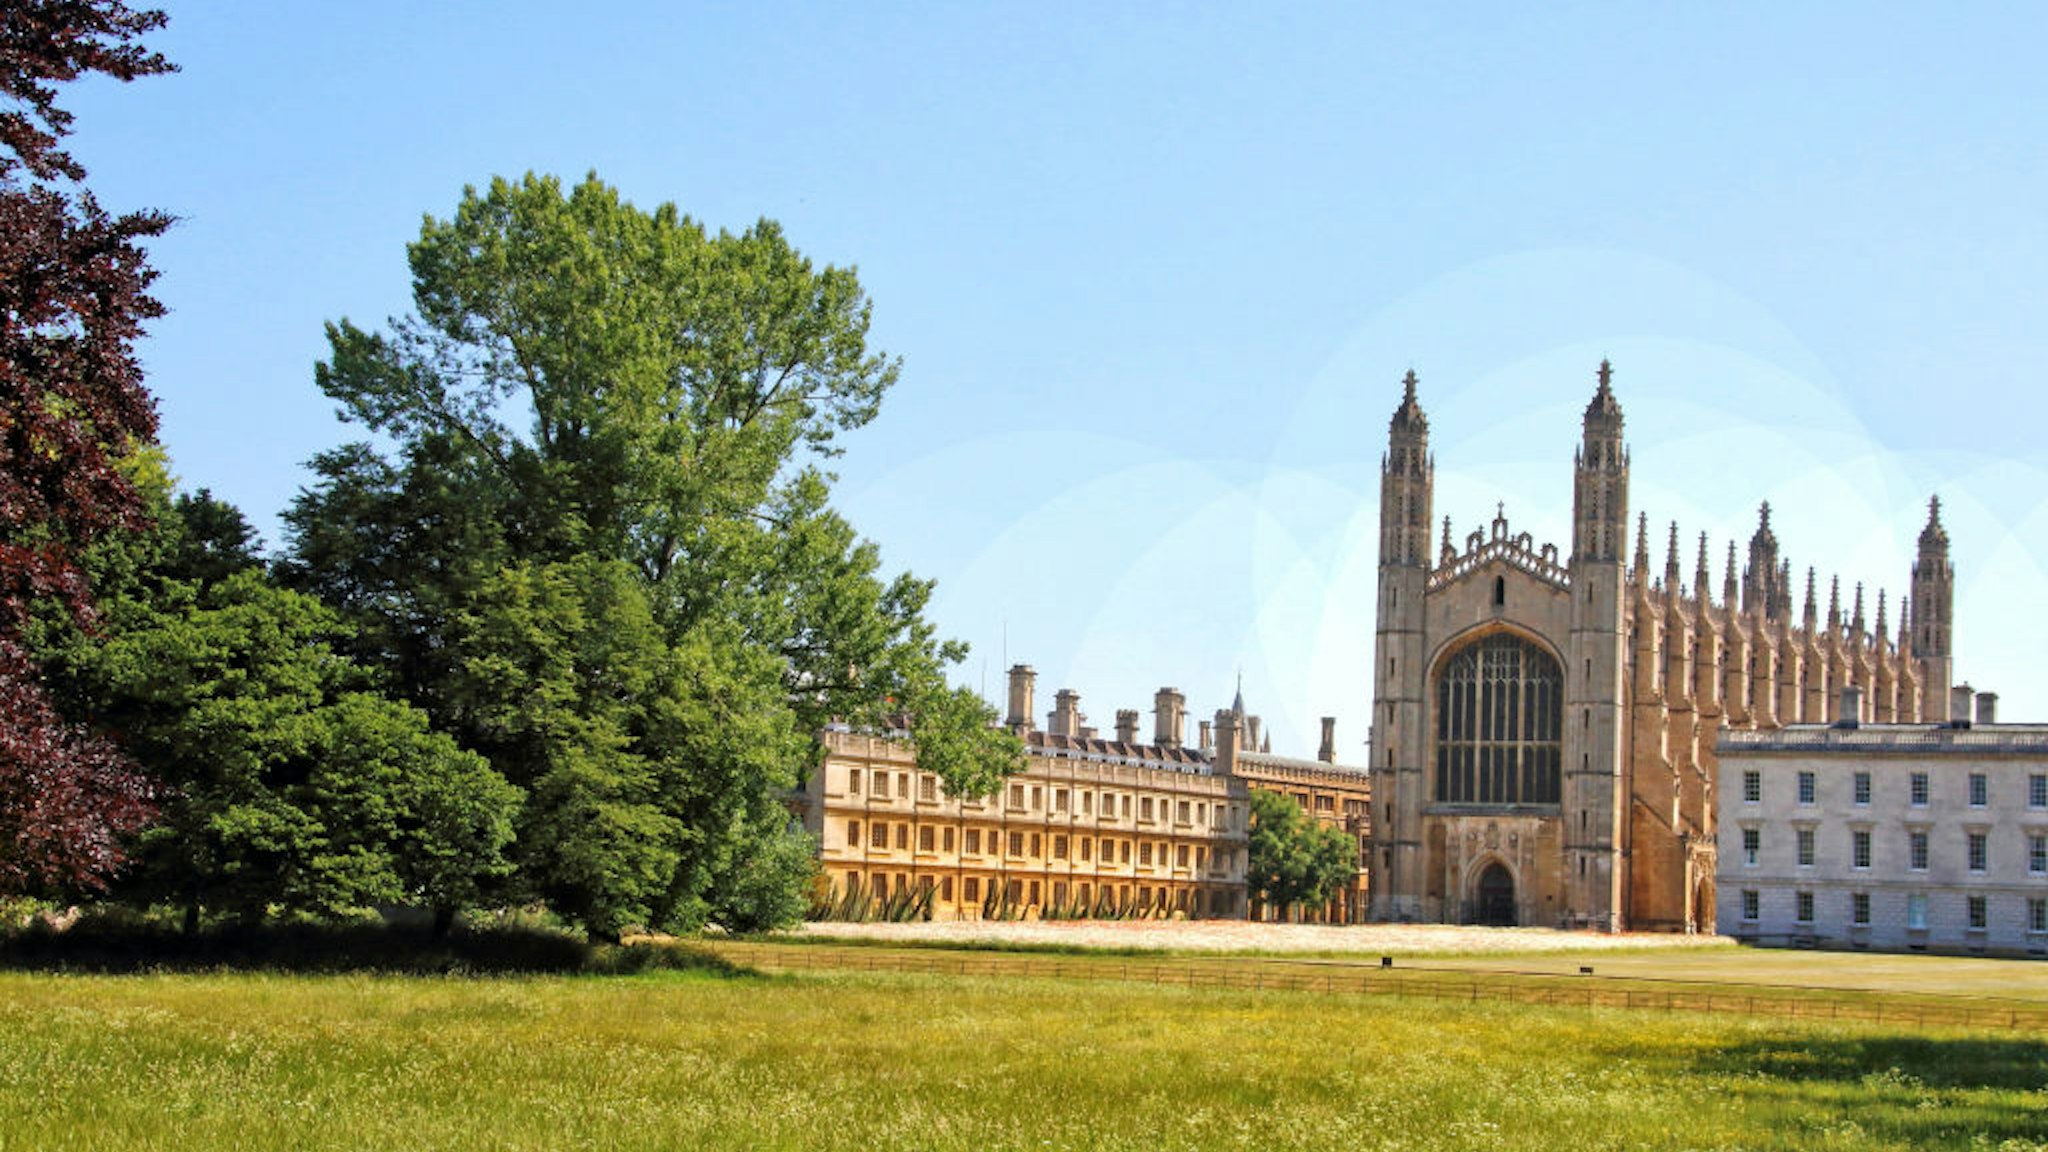 Kings College, Cambridge is pictured deserted due to the coronavirus outbreak. Cambridge University has announced that there will be no face-to-face lectures over the course of the next 2020/2021 academic year due to COVID-19.